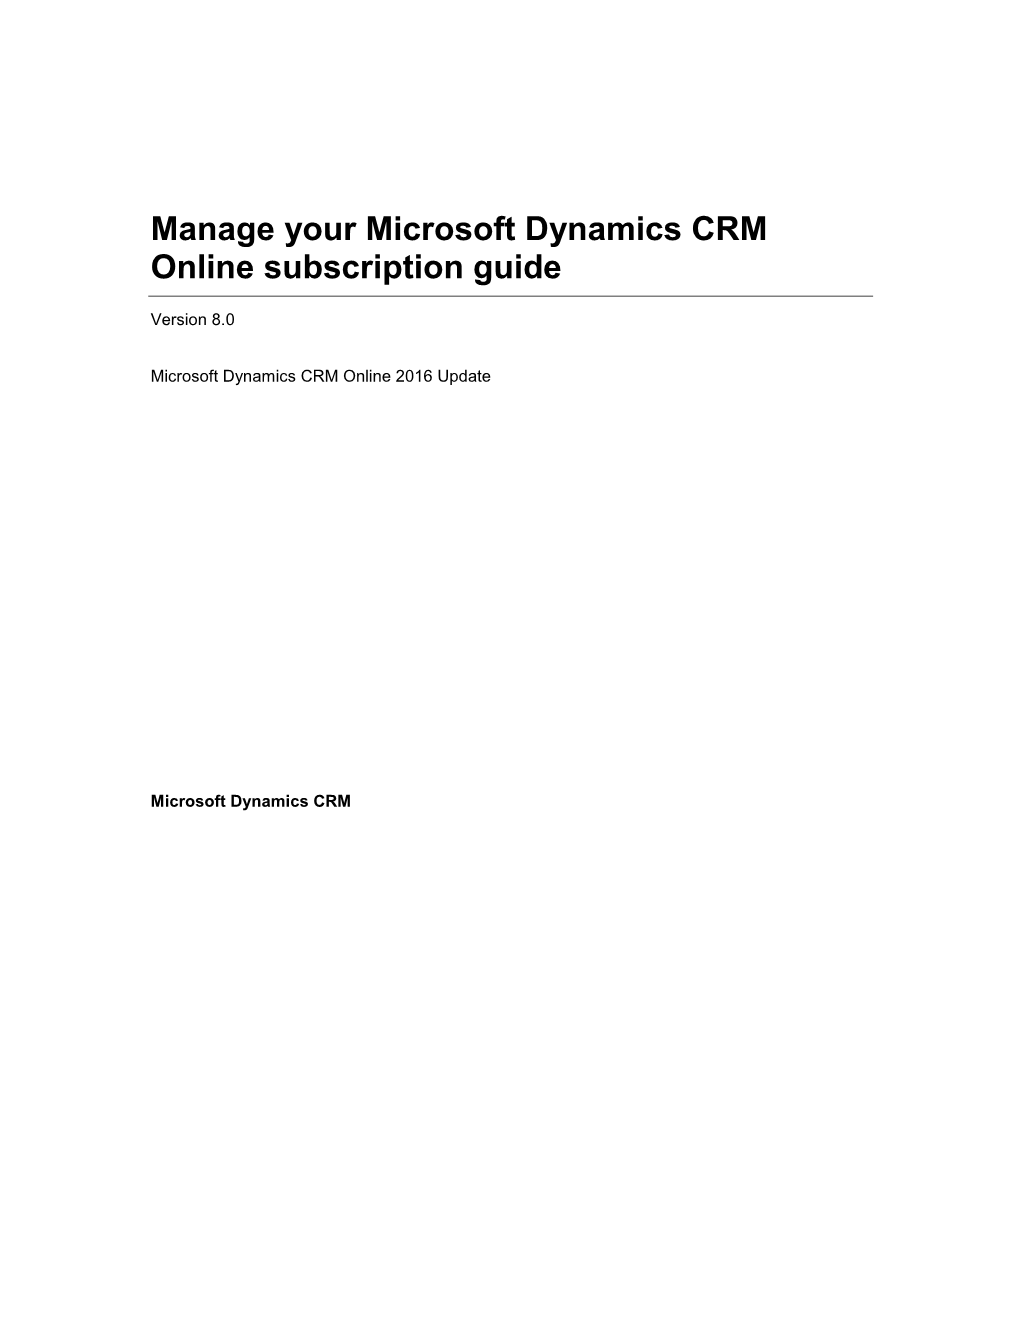 Manage Your Microsoft Dynamics CRM Online Subscription Guide